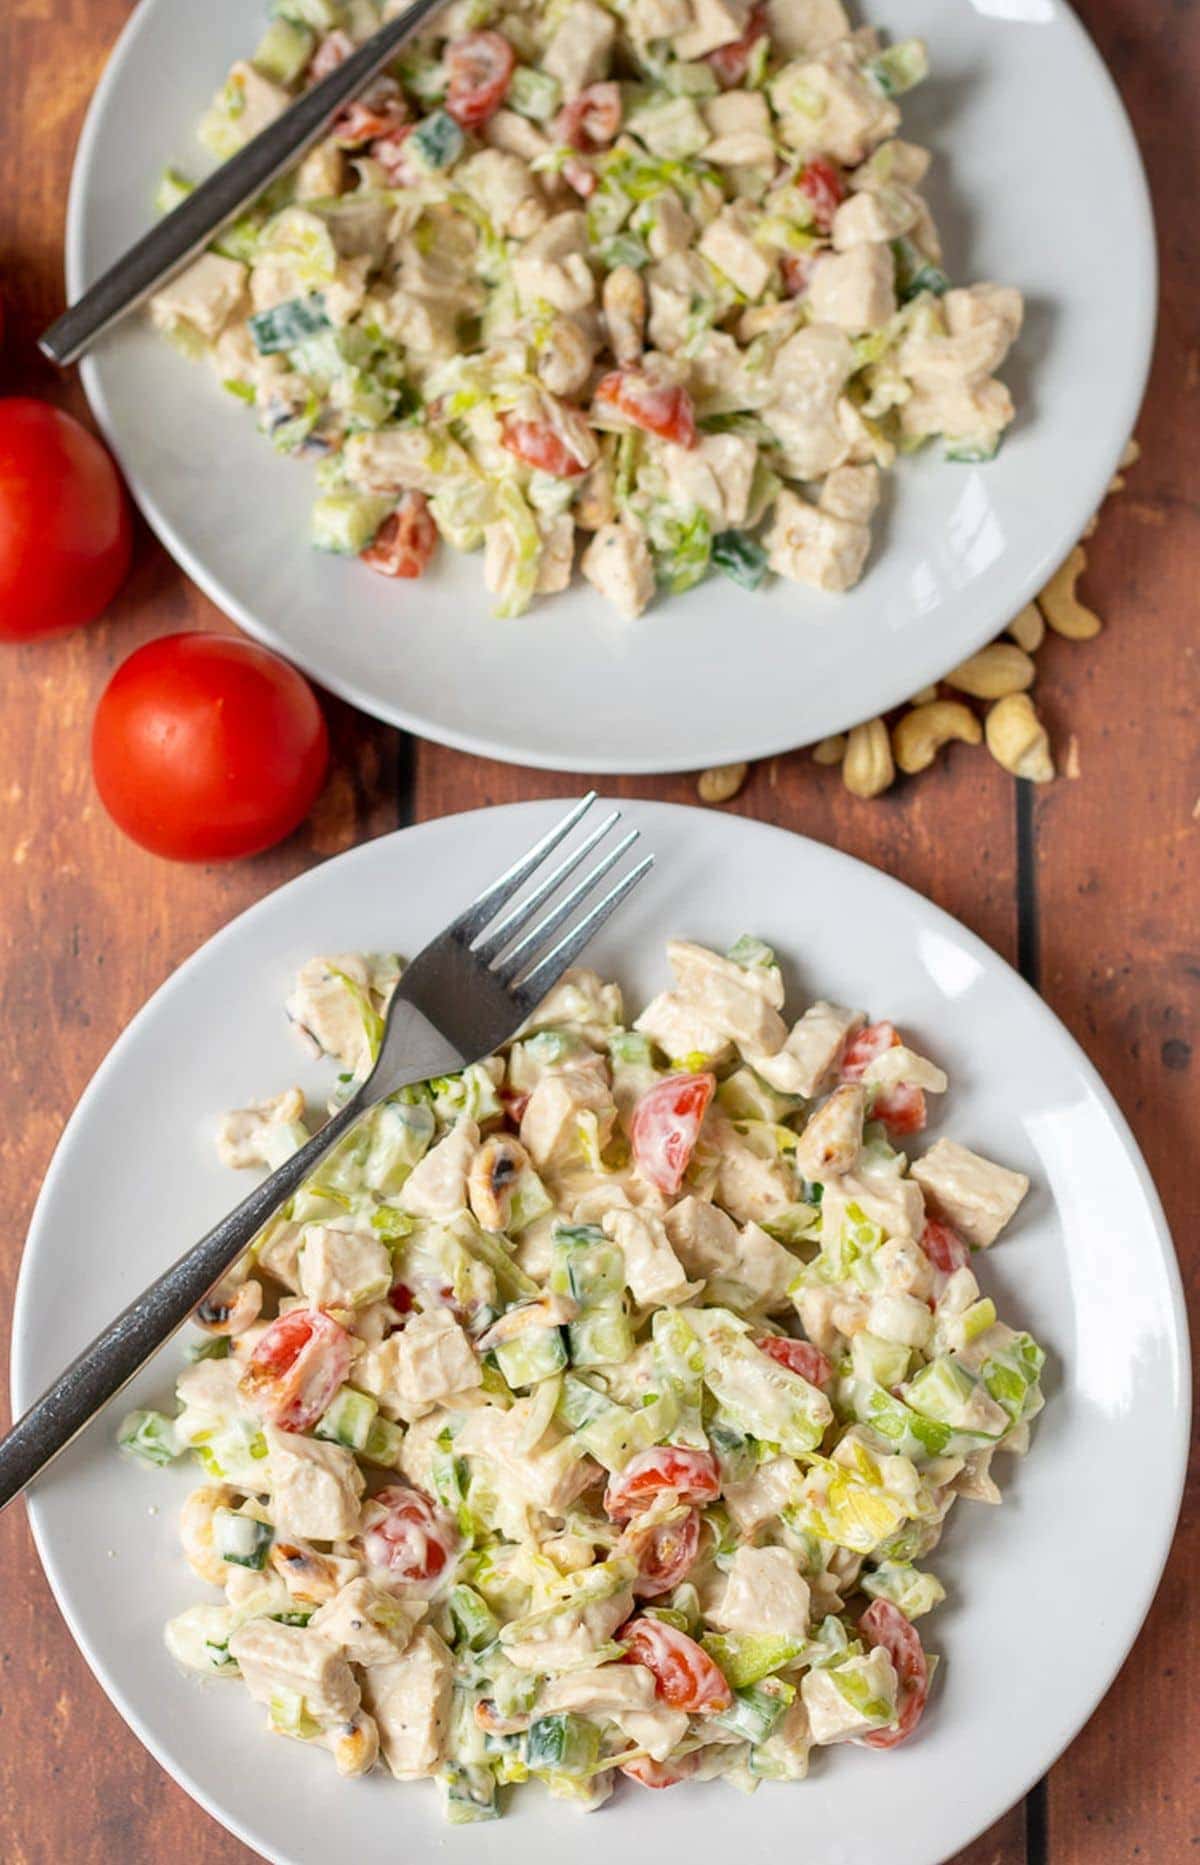 Birds eye view of two plates of healthy chicken salad with forks on. 2 tomatoes and cashew nuts in between as decoration.